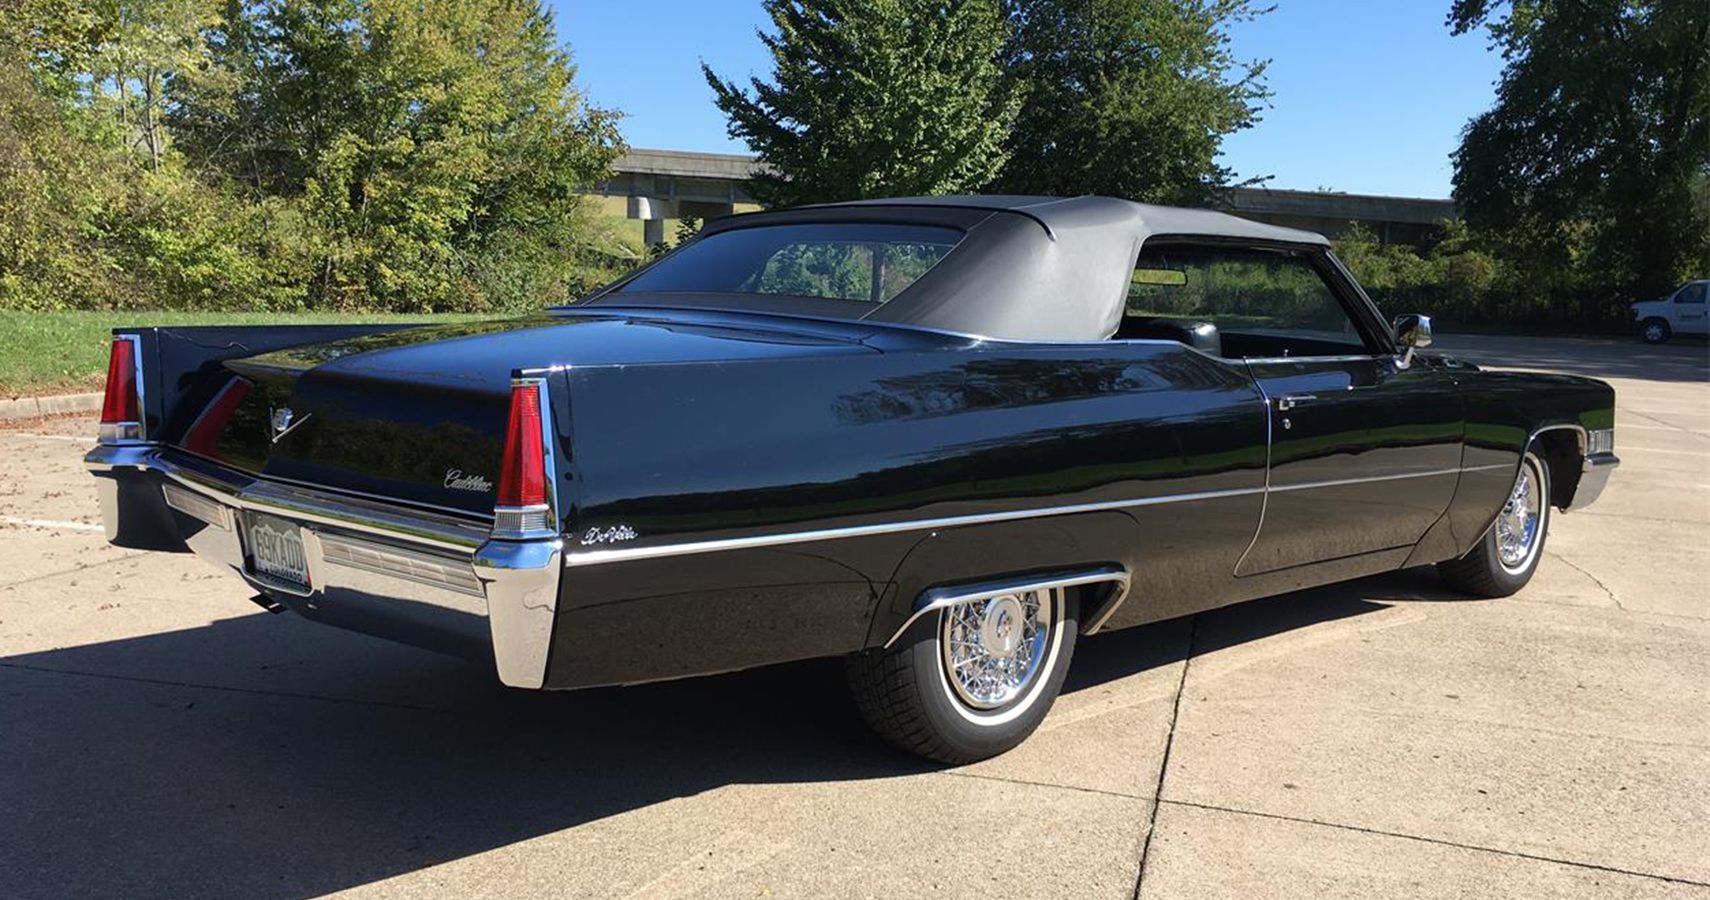 In 1969, The Coupe DeVille Became Fancier With A Redesign, Based On The 1967 Fleetwood Eldorado, And Became Pretty Long As Well